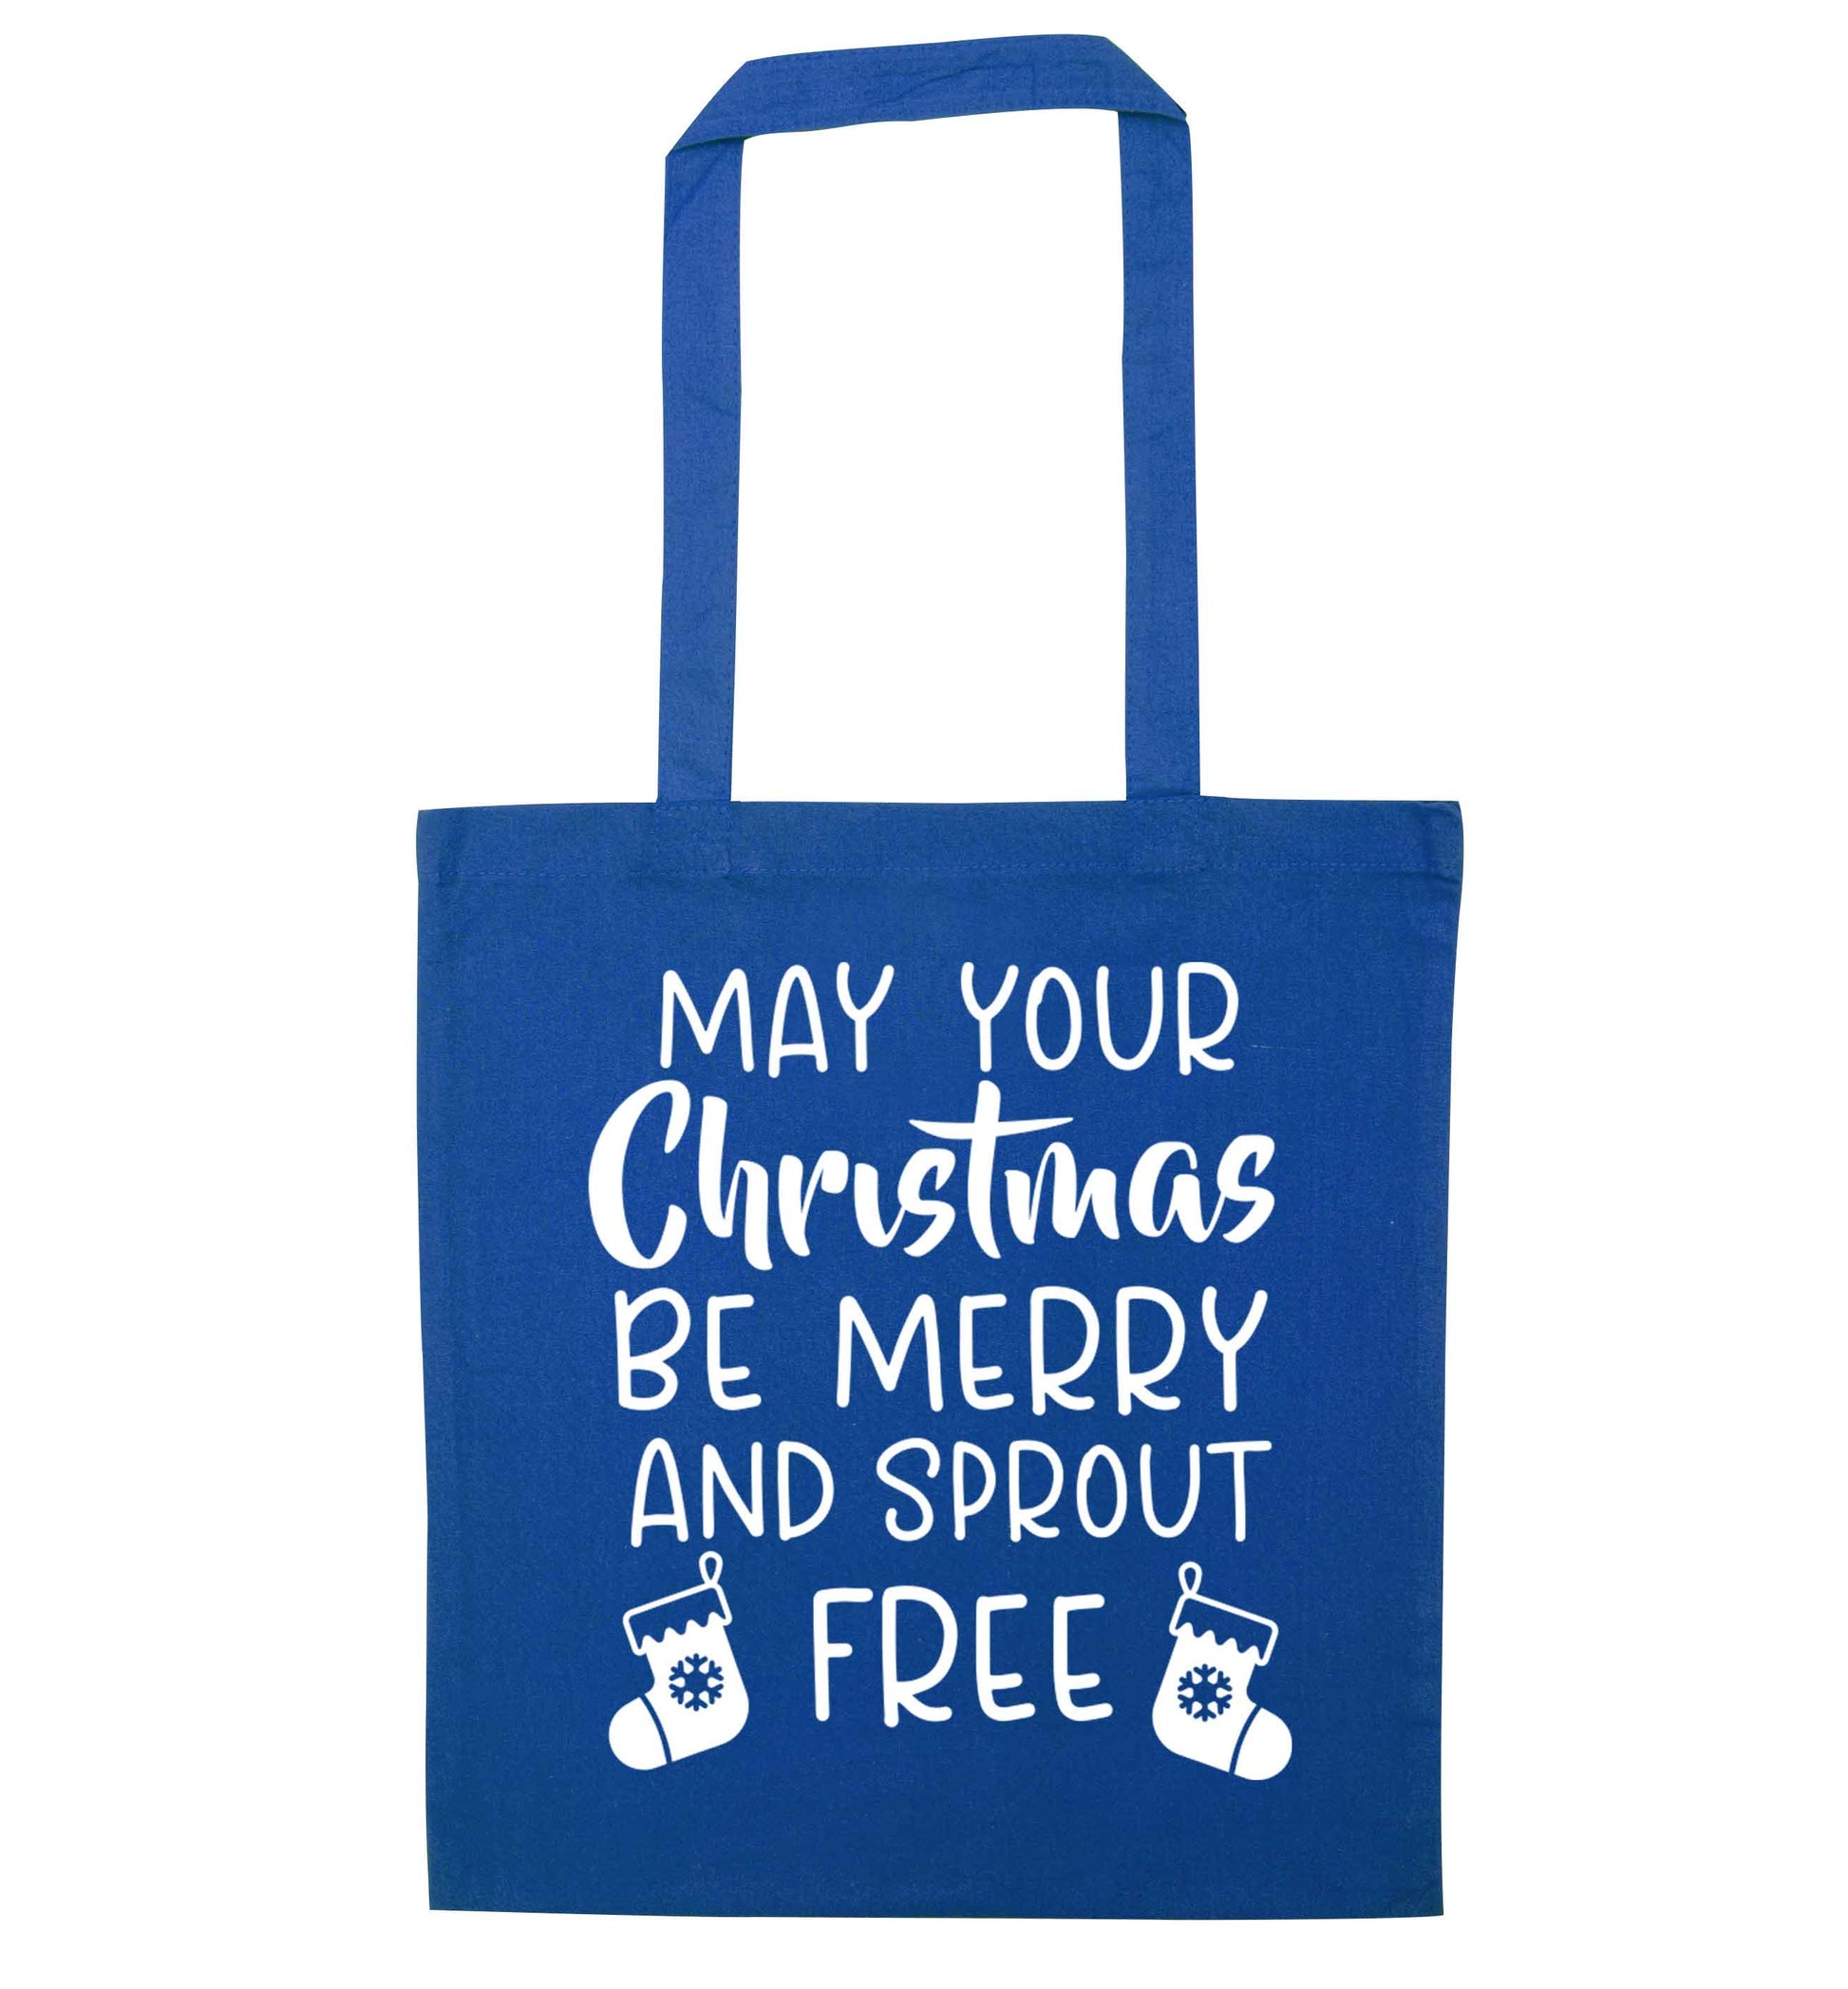 May your Christmas be merry and sprout free blue tote bag